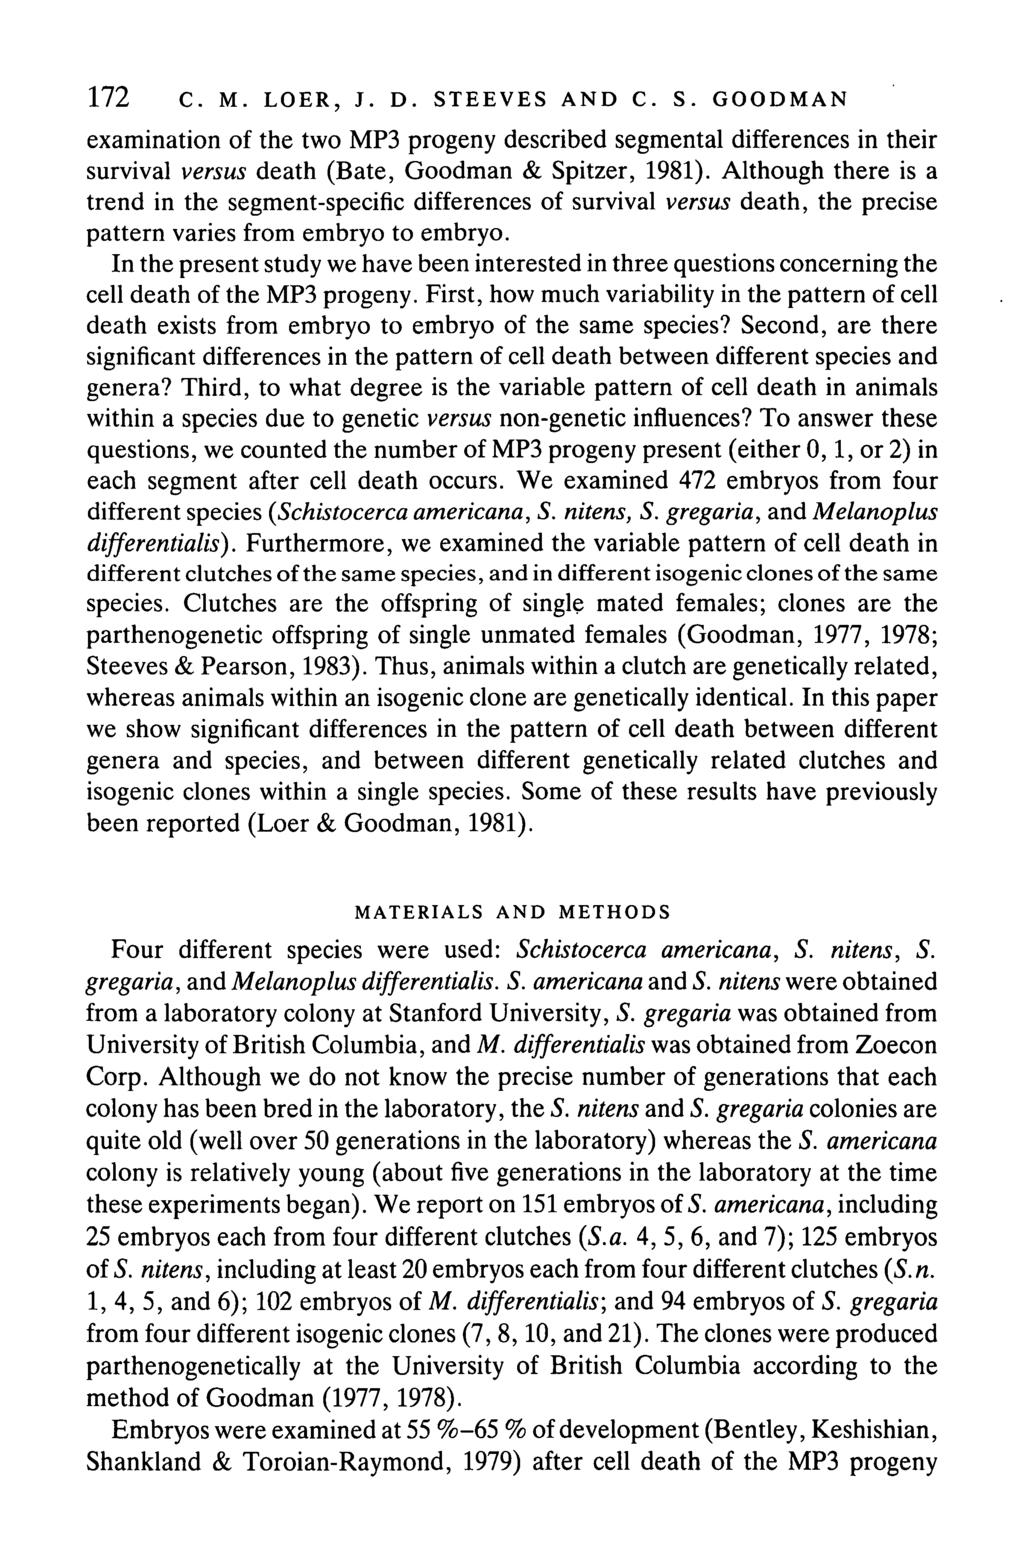 172 C. M. LOER, J. D. STEEVES AND C. S. GOODMAN examination of the two MP3 progeny described segmental differences in their survival versus death (Bate, Goodman & Spitzer, 1981).